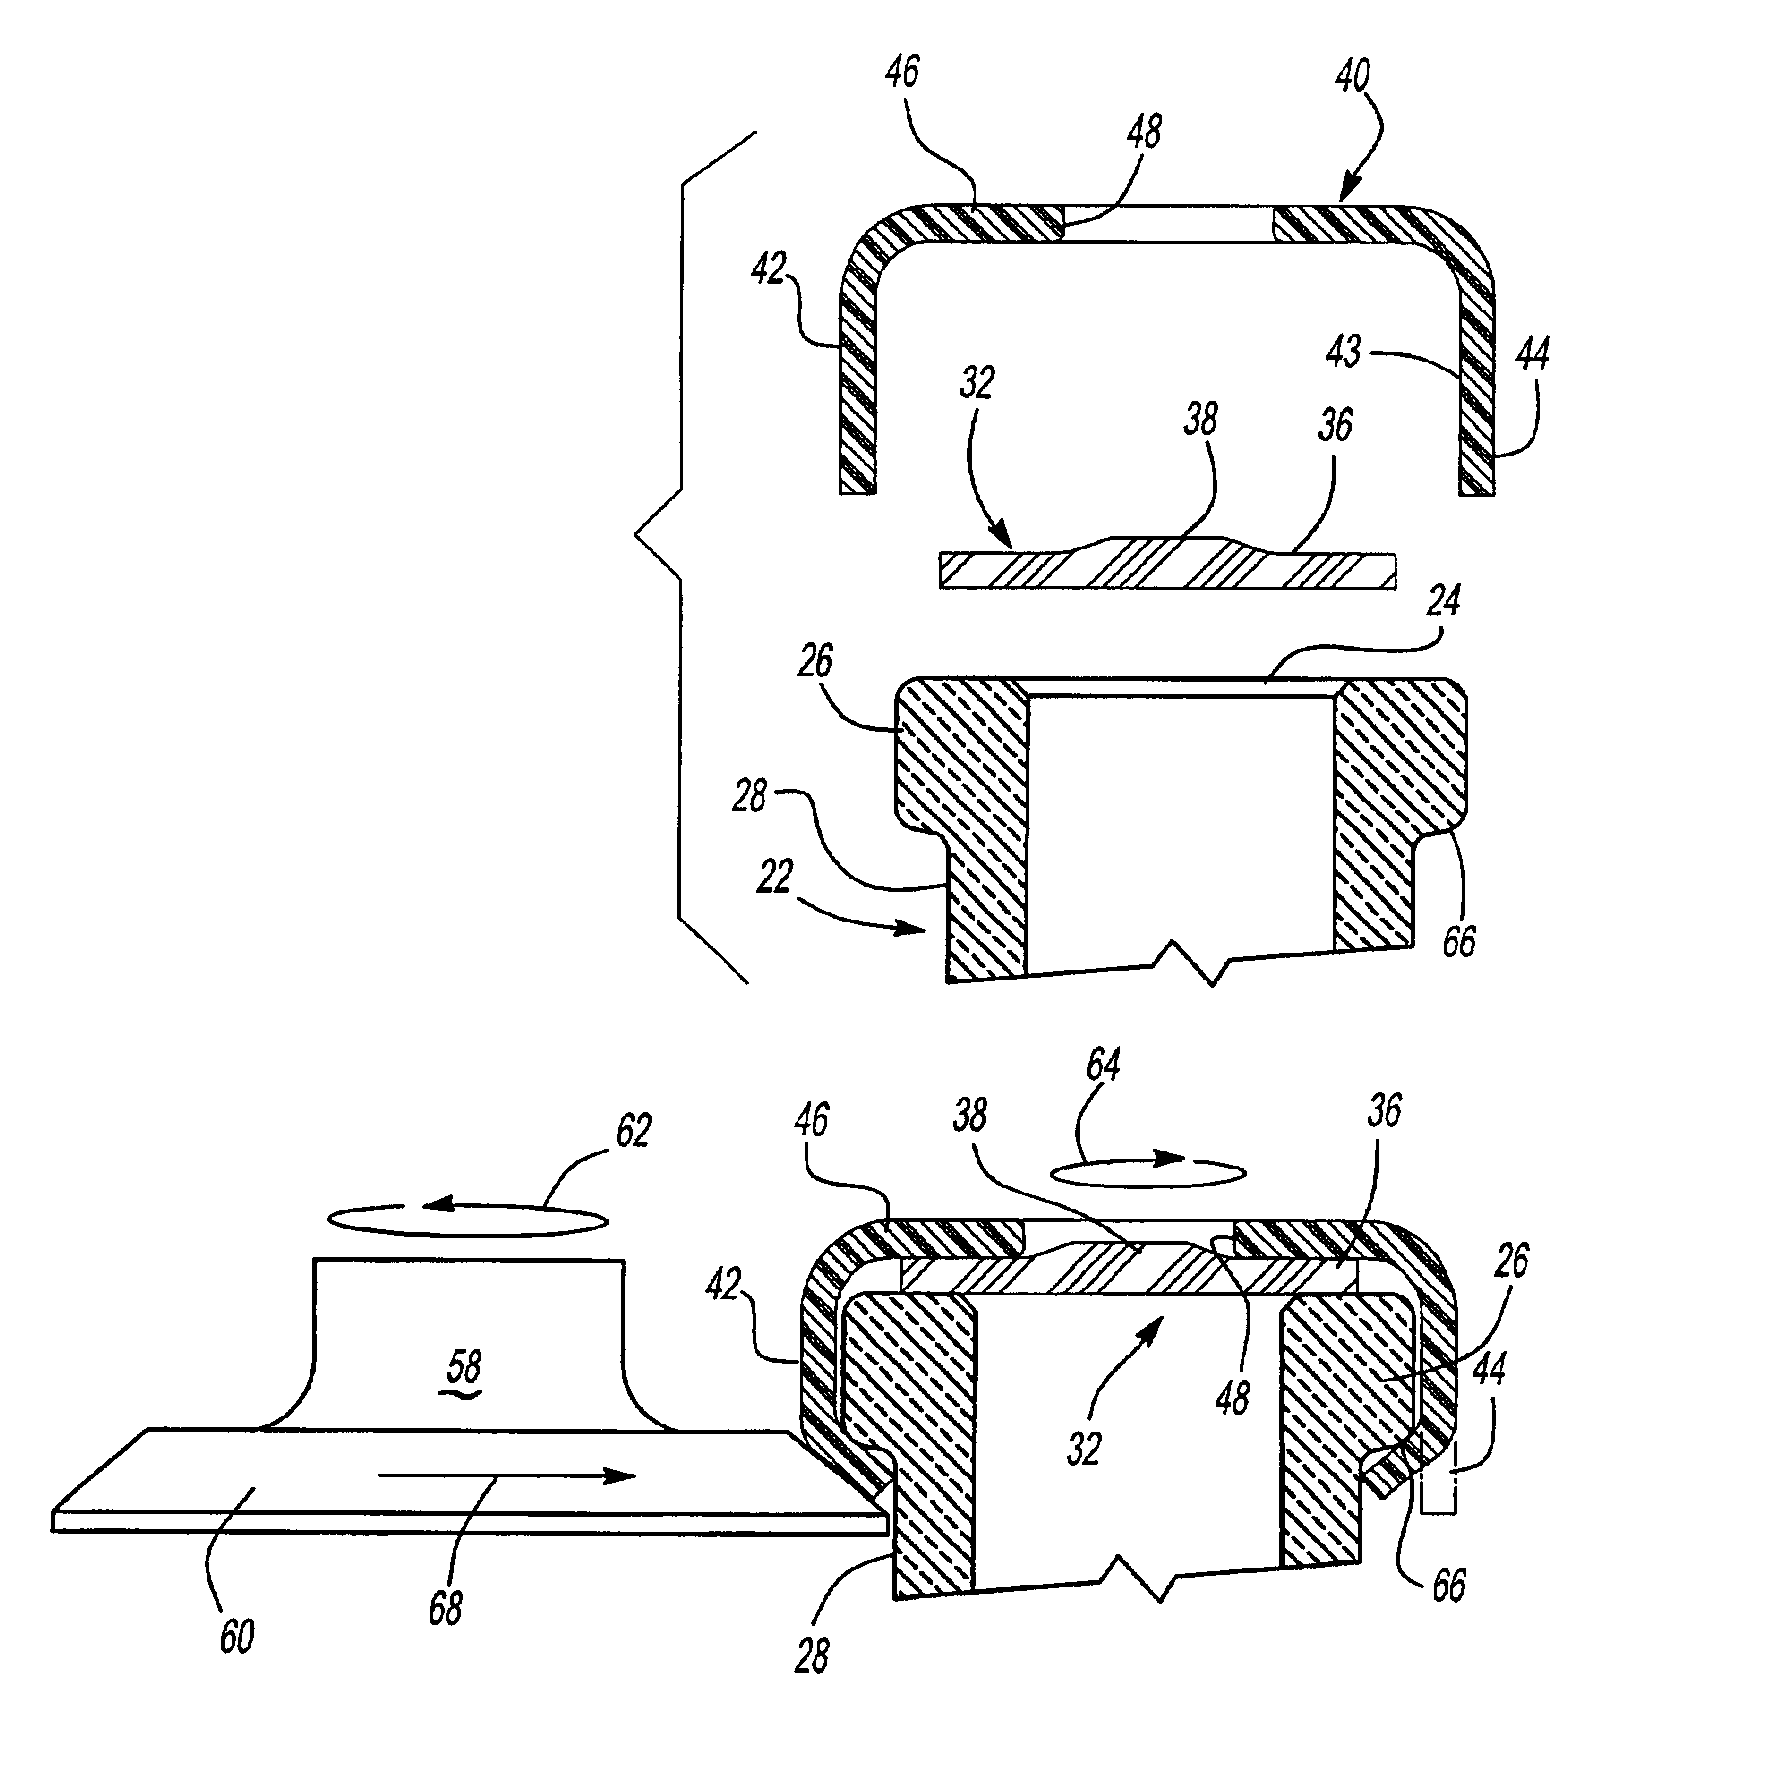 Method of sealing a cartridge or other medical container with a plastic closure